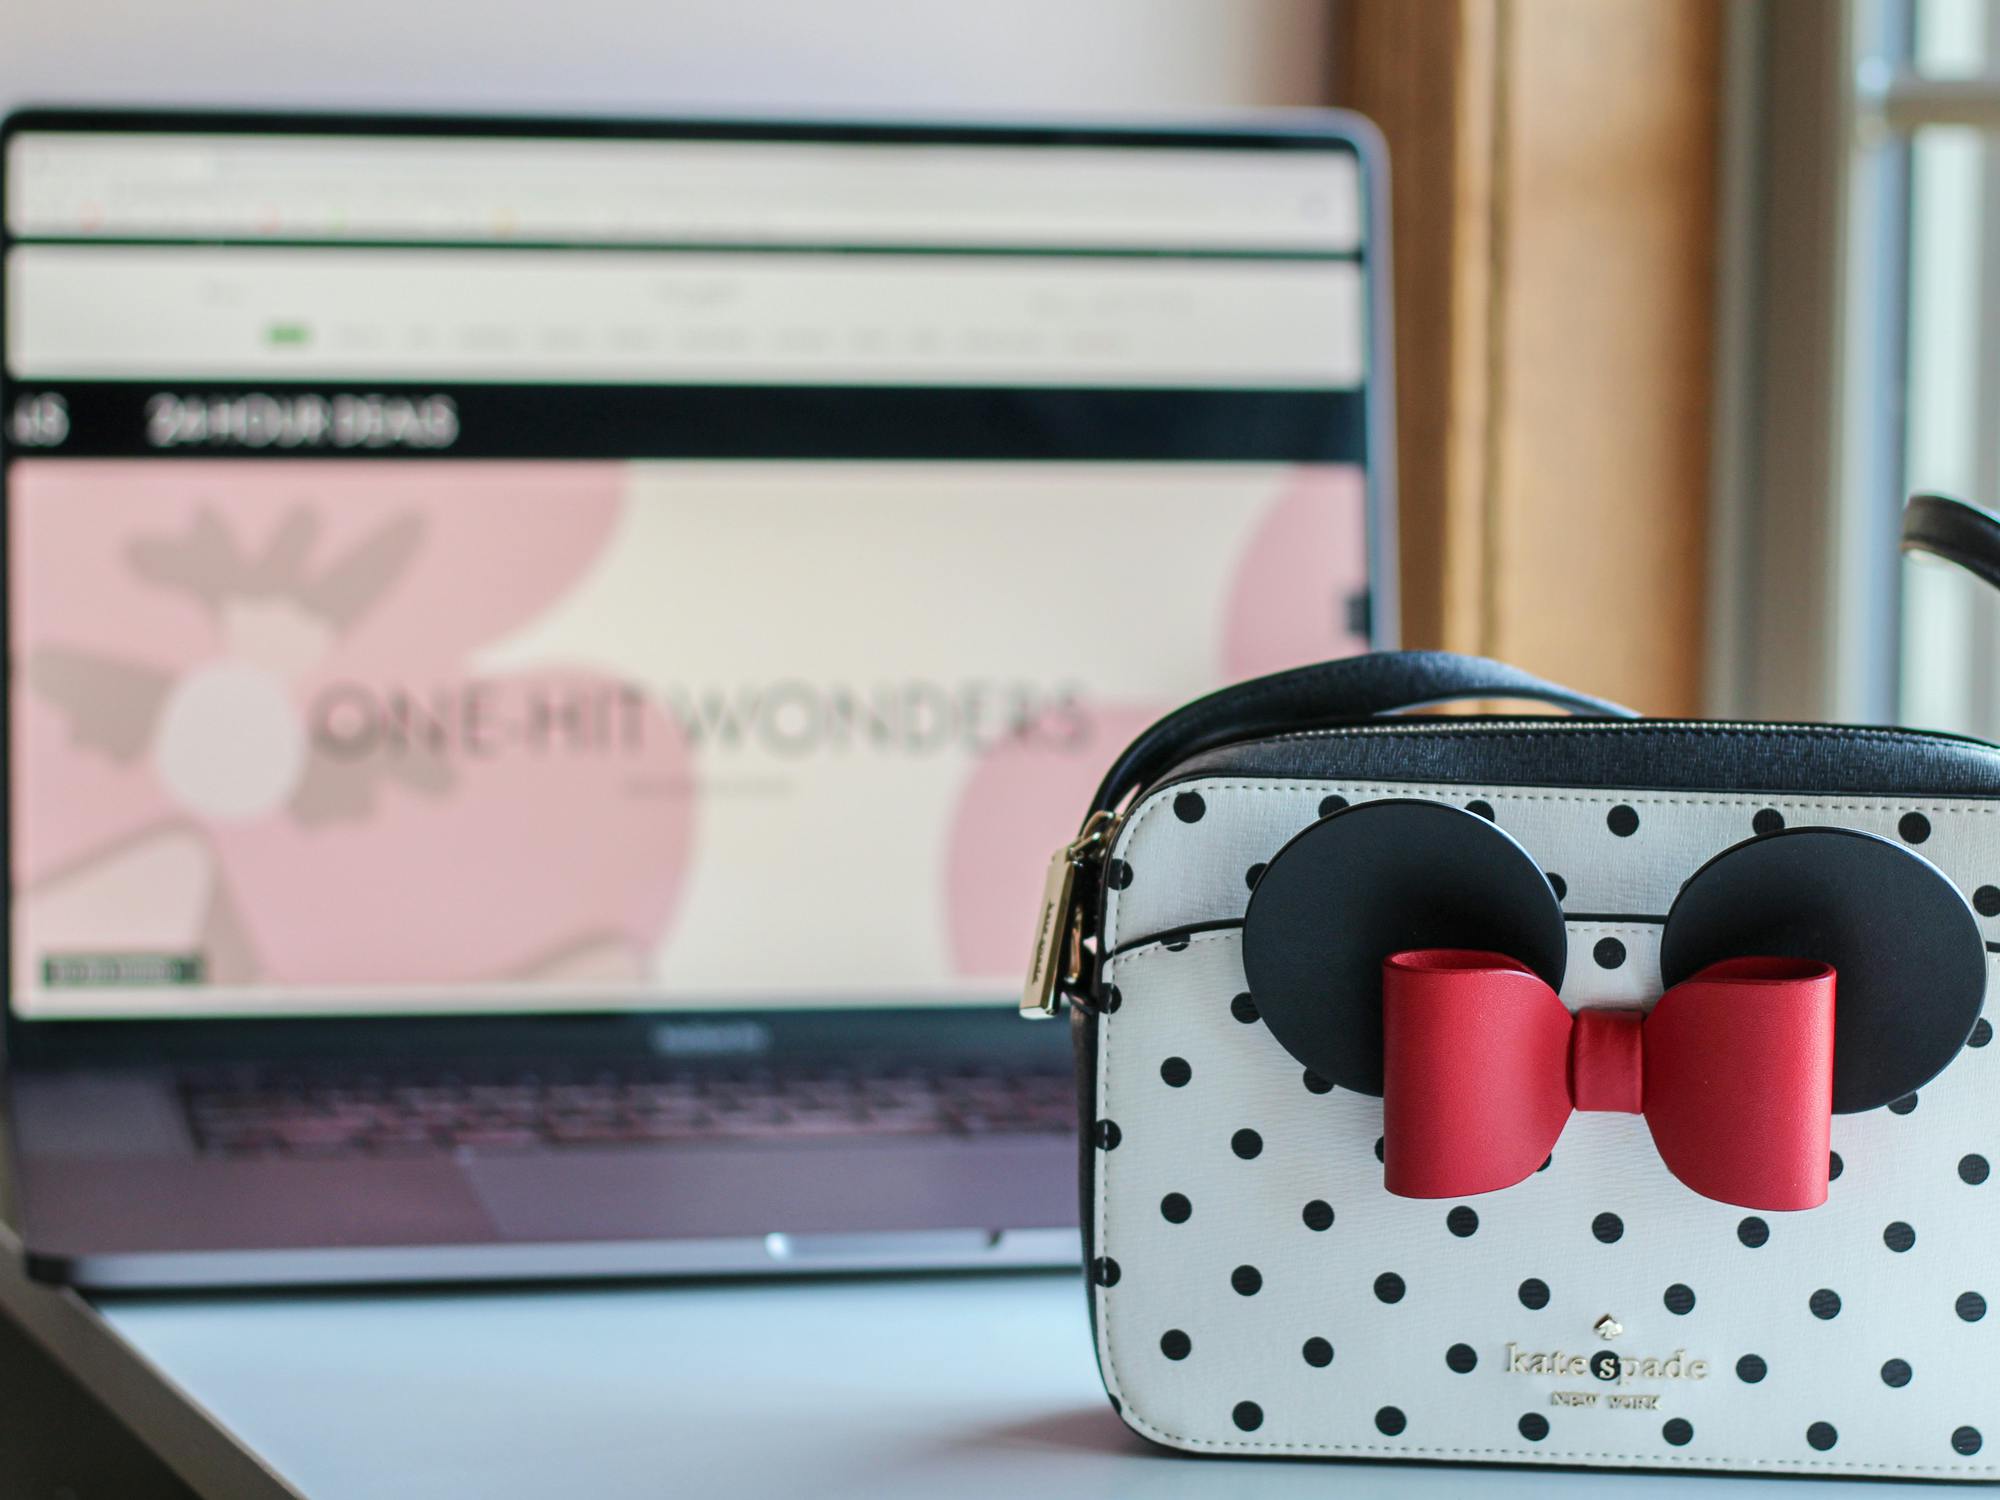 Kate Spade Surprise Sale: Here's How It Works - The Krazy Coupon Lady